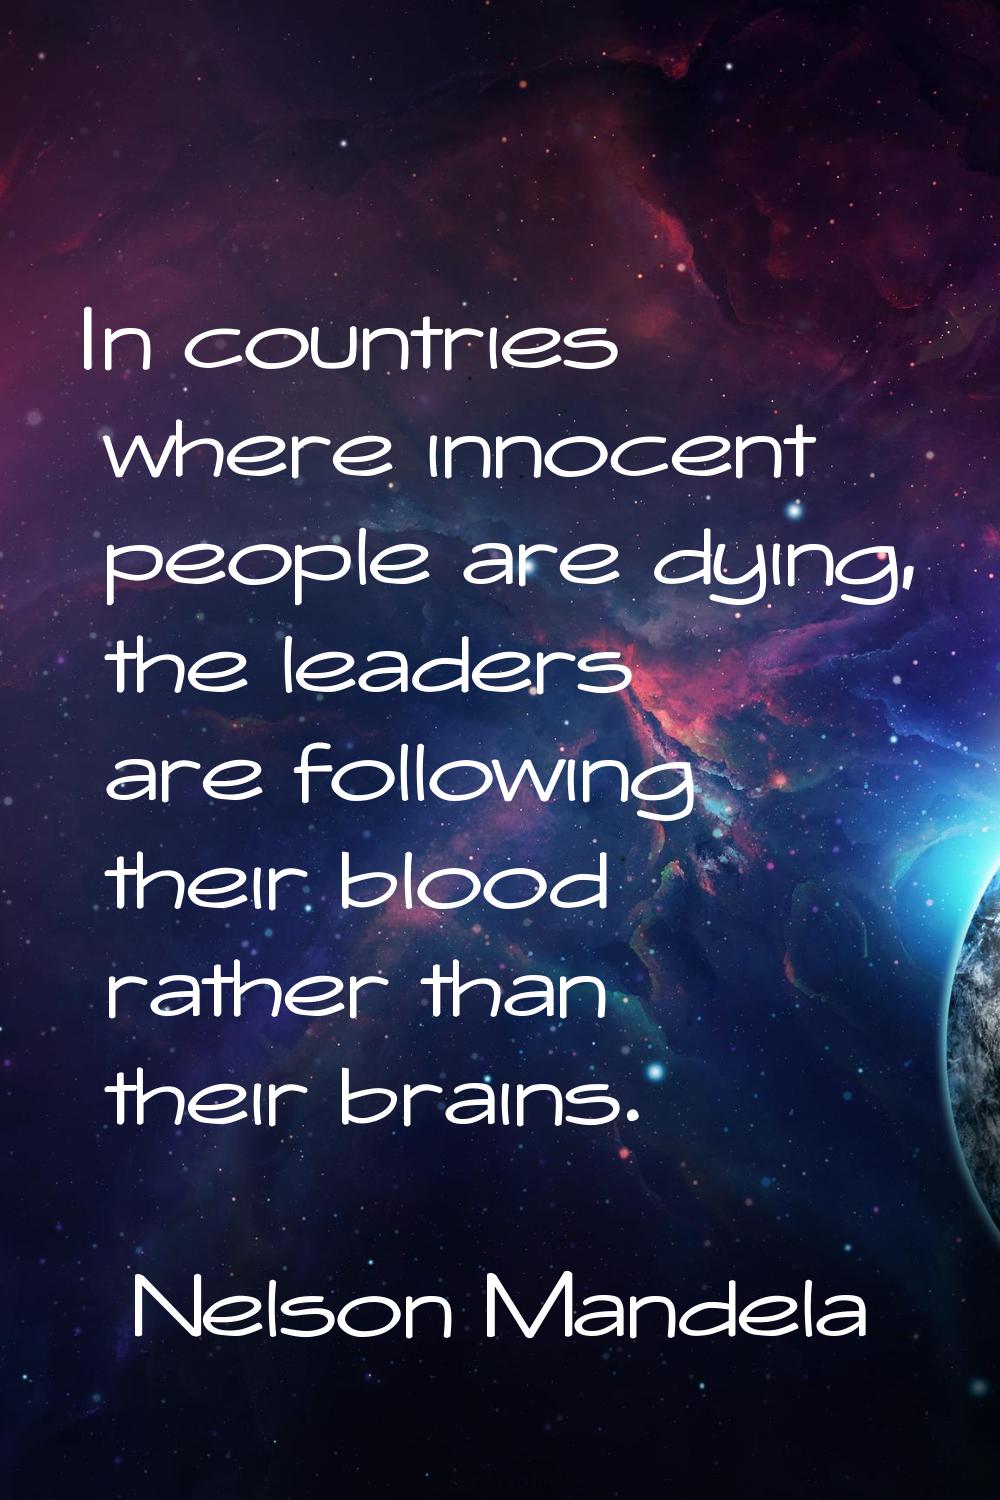 In countries where innocent people are dying, the leaders are following their blood rather than the